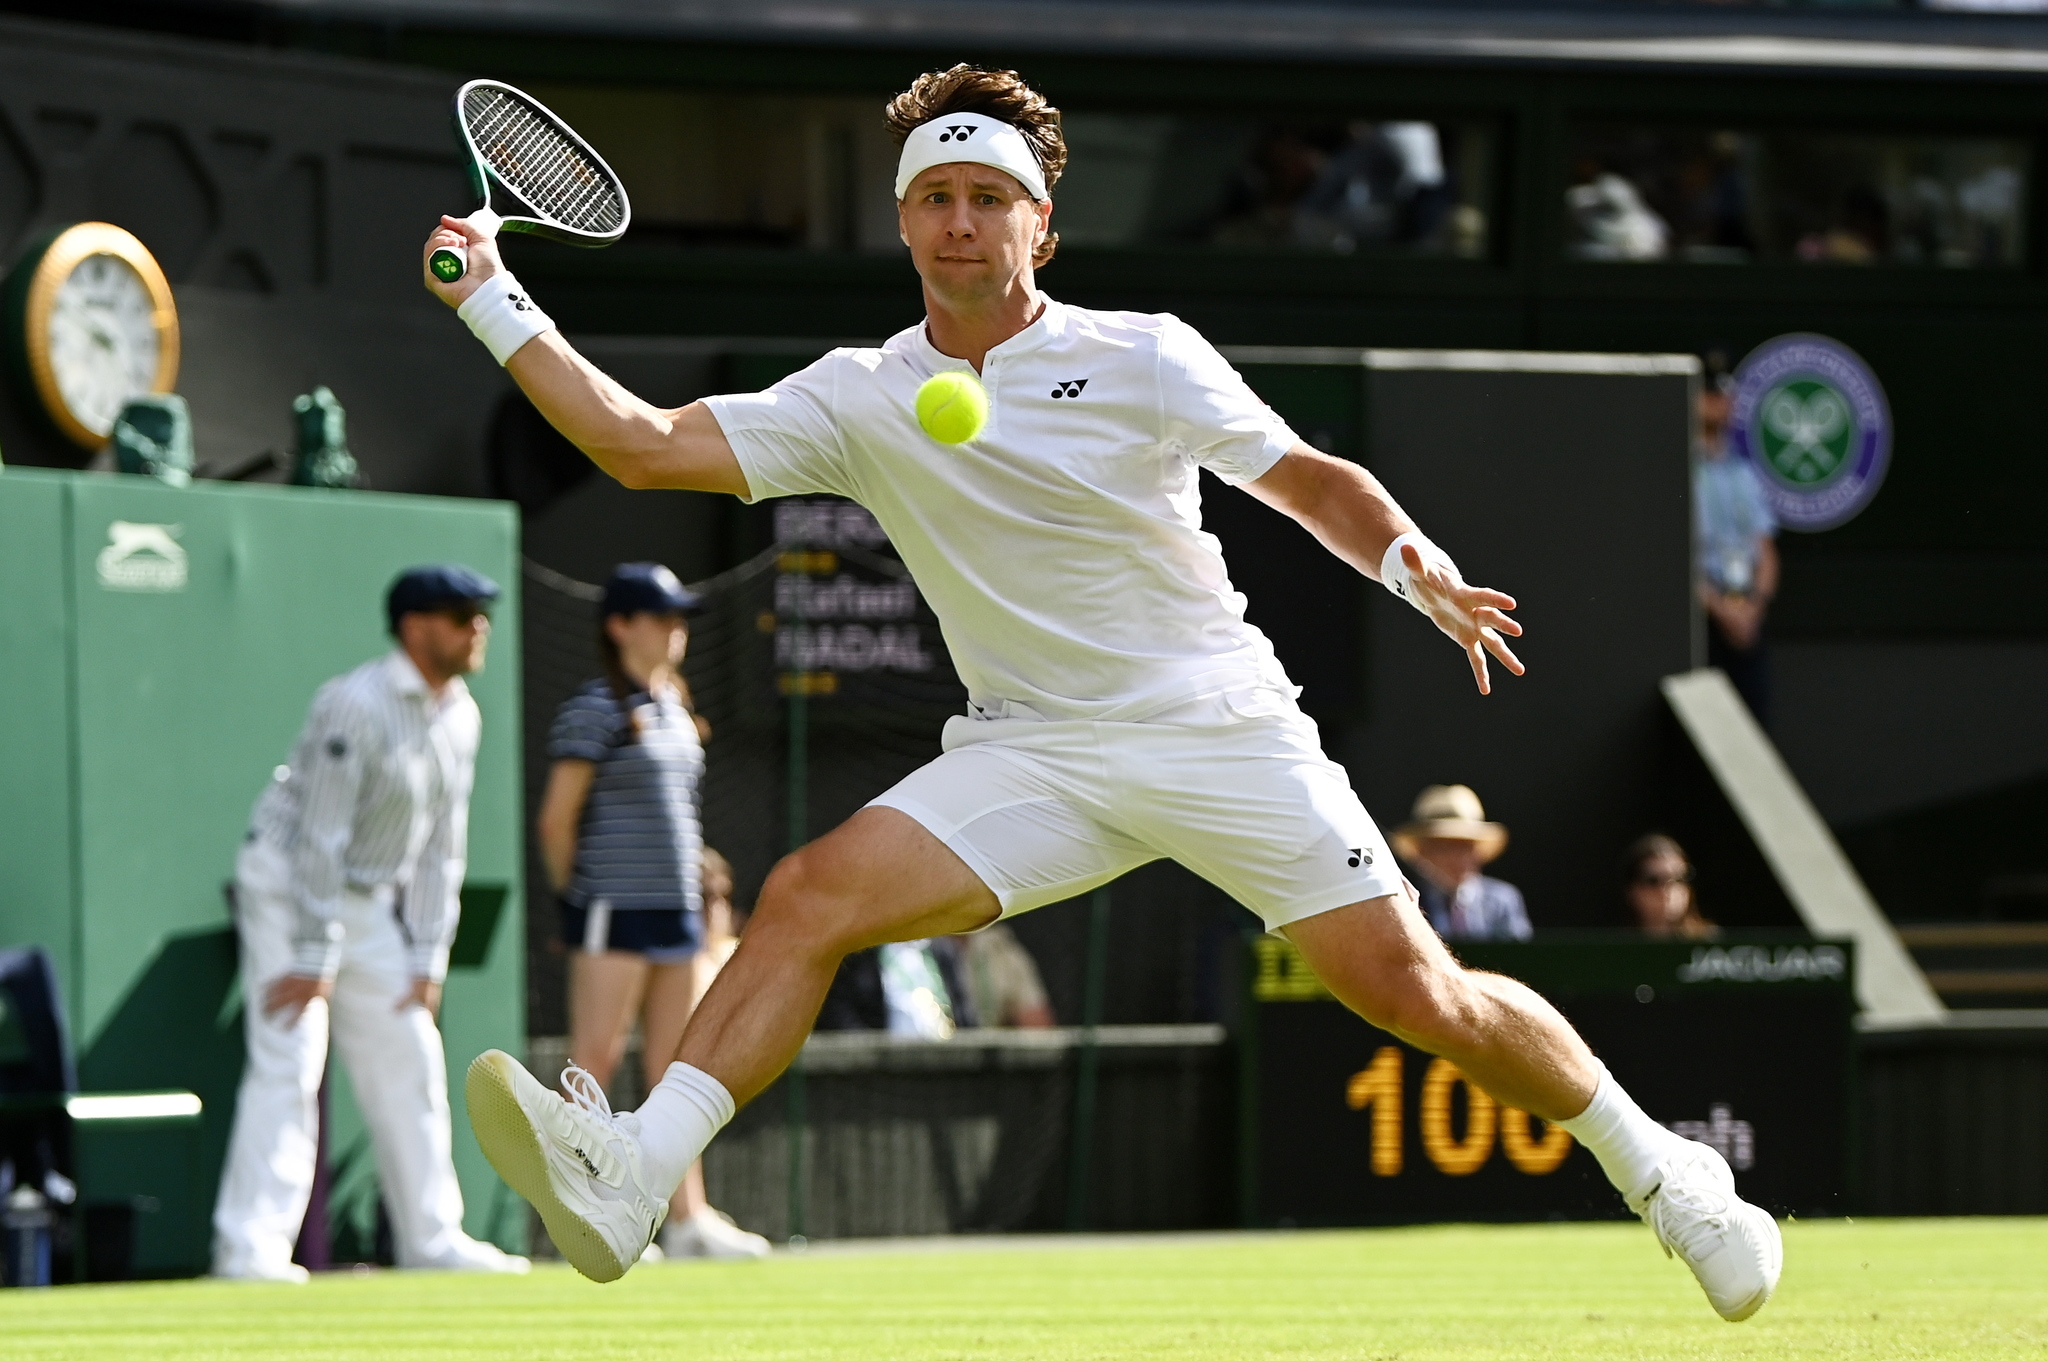 Wimbledon (United Kingdom), 30/06/2022.- Ricardas  lt;HIT gt;Berankis lt;/HIT gt; of Lithuania in action in the men's second round match against Rafael Nadal of Spain at the Wimbledon Championships, in Wimbledon, Britain, 30 June 2022. (Tenis, Lituania, España, Reino Unido) EFE/EPA/NEIL HALL EDITORIAL USE ONLY